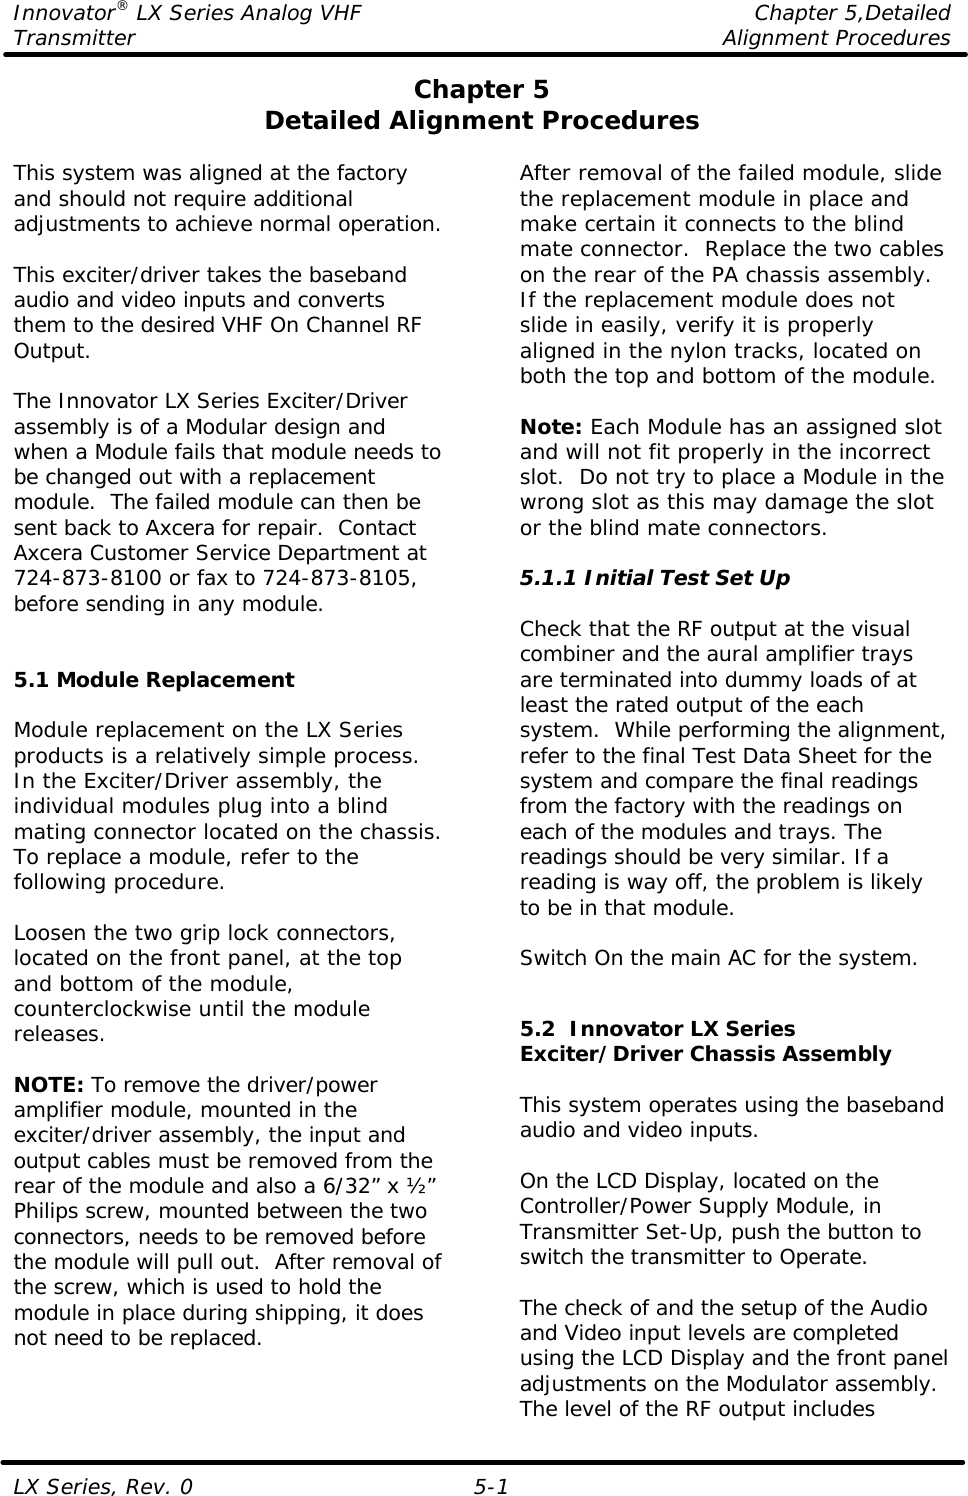 Innovator® LX Series Analog VHF    Chapter 5,Detailed Transmitter    Alignment Procedures  LX Series, Rev. 0 5-1 Chapter 5 Detailed Alignment Procedures  This system was aligned at the factory and should not require additional adjustments to achieve normal operation.  This exciter/driver takes the baseband audio and video inputs and converts them to the desired VHF On Channel RF Output.  The Innovator LX Series Exciter/Driver assembly is of a Modular design and when a Module fails that module needs to be changed out with a replacement module.  The failed module can then be sent back to Axcera for repair.  Contact Axcera Customer Service Department at 724-873-8100 or fax to 724-873-8105, before sending in any module.   5.1 Module Replacement  Module replacement on the LX Series products is a relatively simple process. In the Exciter/Driver assembly, the individual modules plug into a blind mating connector located on the chassis. To replace a module, refer to the following procedure.  Loosen the two grip lock connectors, located on the front panel, at the top and bottom of the module, counterclockwise until the module releases.  NOTE: To remove the driver/power amplifier module, mounted in the exciter/driver assembly, the input and output cables must be removed from the rear of the module and also a 6/32” x ½” Philips screw, mounted between the two connectors, needs to be removed before the module will pull out.  After removal of the screw, which is used to hold the module in place during shipping, it does not need to be replaced.  After removal of the failed module, slide the replacement module in place and make certain it connects to the blind mate connector.  Replace the two cables on the rear of the PA chassis assembly.  If the replacement module does not slide in easily, verify it is properly aligned in the nylon tracks, located on both the top and bottom of the module.  Note: Each Module has an assigned slot and will not fit properly in the incorrect slot.  Do not try to place a Module in the wrong slot as this may damage the slot or the blind mate connectors.  5.1.1 Initial Test Set Up  Check that the RF output at the visual combiner and the aural amplifier trays are terminated into dummy loads of at least the rated output of the each system.  While performing the alignment, refer to the final Test Data Sheet for the system and compare the final readings from the factory with the readings on each of the modules and trays. The readings should be very similar. If a reading is way off, the problem is likely to be in that module.  Switch On the main AC for the system.   5.2  Innovator LX Series Exciter/Driver Chassis Assembly  This system operates using the baseband audio and video inputs.  On the LCD Display, located on the Controller/Power Supply Module, in Transmitter Set-Up, push the button to switch the transmitter to Operate.   The check of and the setup of the Audio and Video input levels are completed using the LCD Display and the front panel adjustments on the Modulator assembly.  The level of the RF output includes 